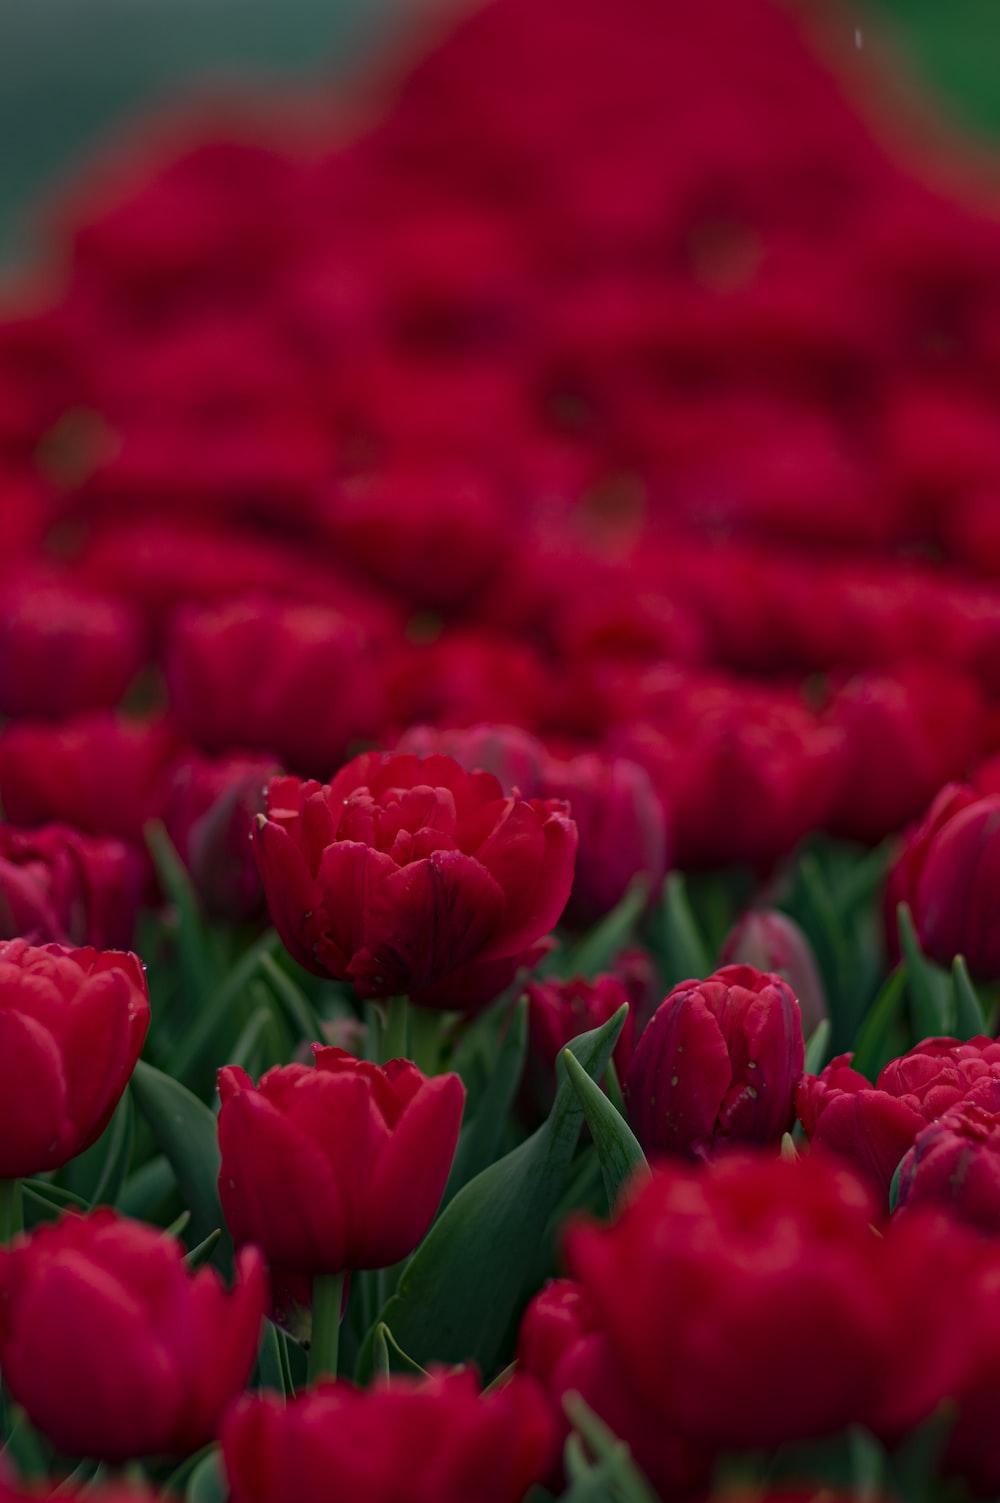 Red tulips in close up photography photo Free Red Image on